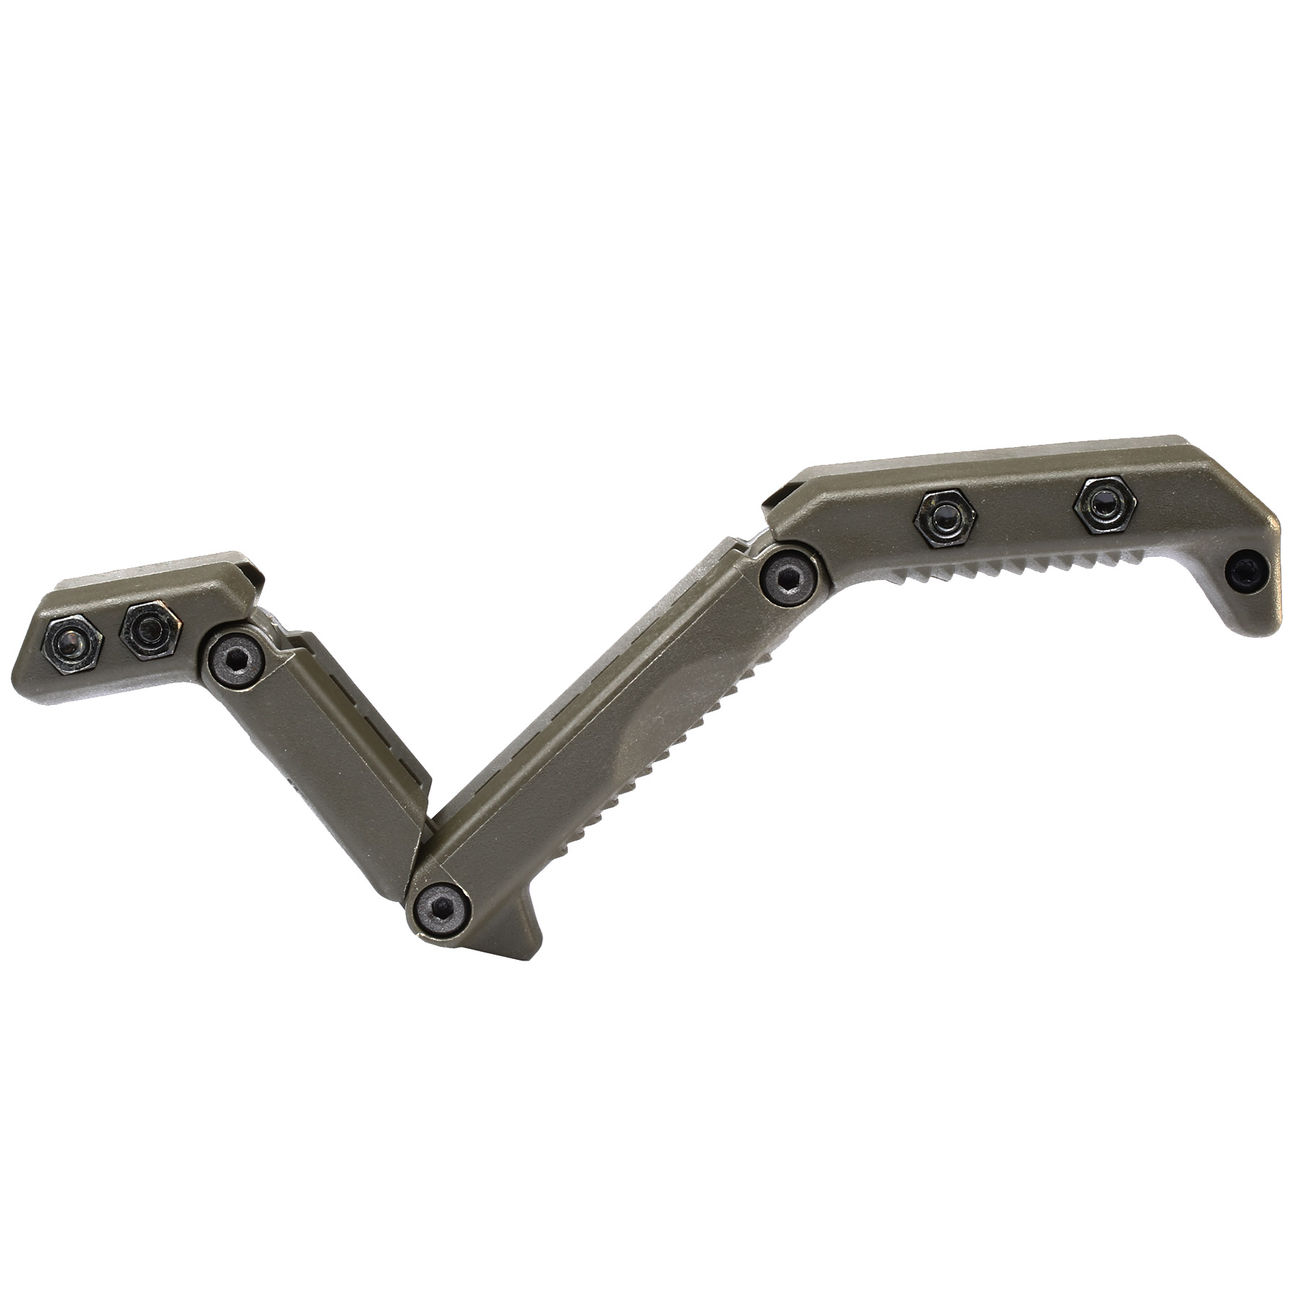 ASG Hera Arms HFGA Multi-Position Polymer Frontgriff oliv Bild 3